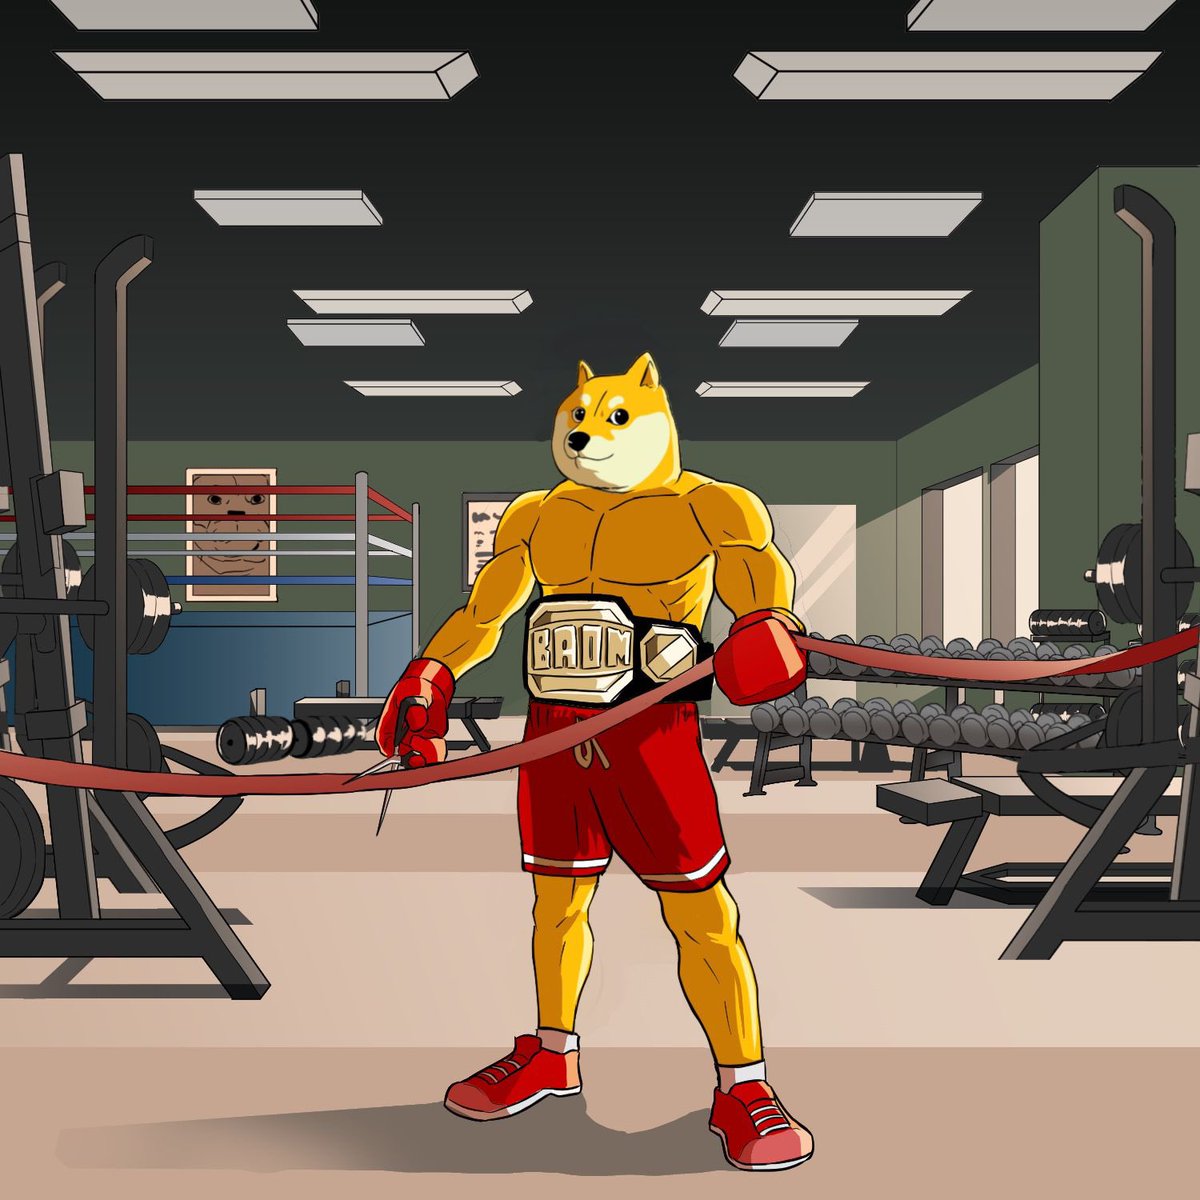 Foge has finally opened his Box Gym! 🥊 For the grand opening he is giving away a total of $250. five people can win $50! 🎁 All you have to do is to follow $BAOM on Twitter, Like, Retweet and post your SOL Adress in the comments! 💸